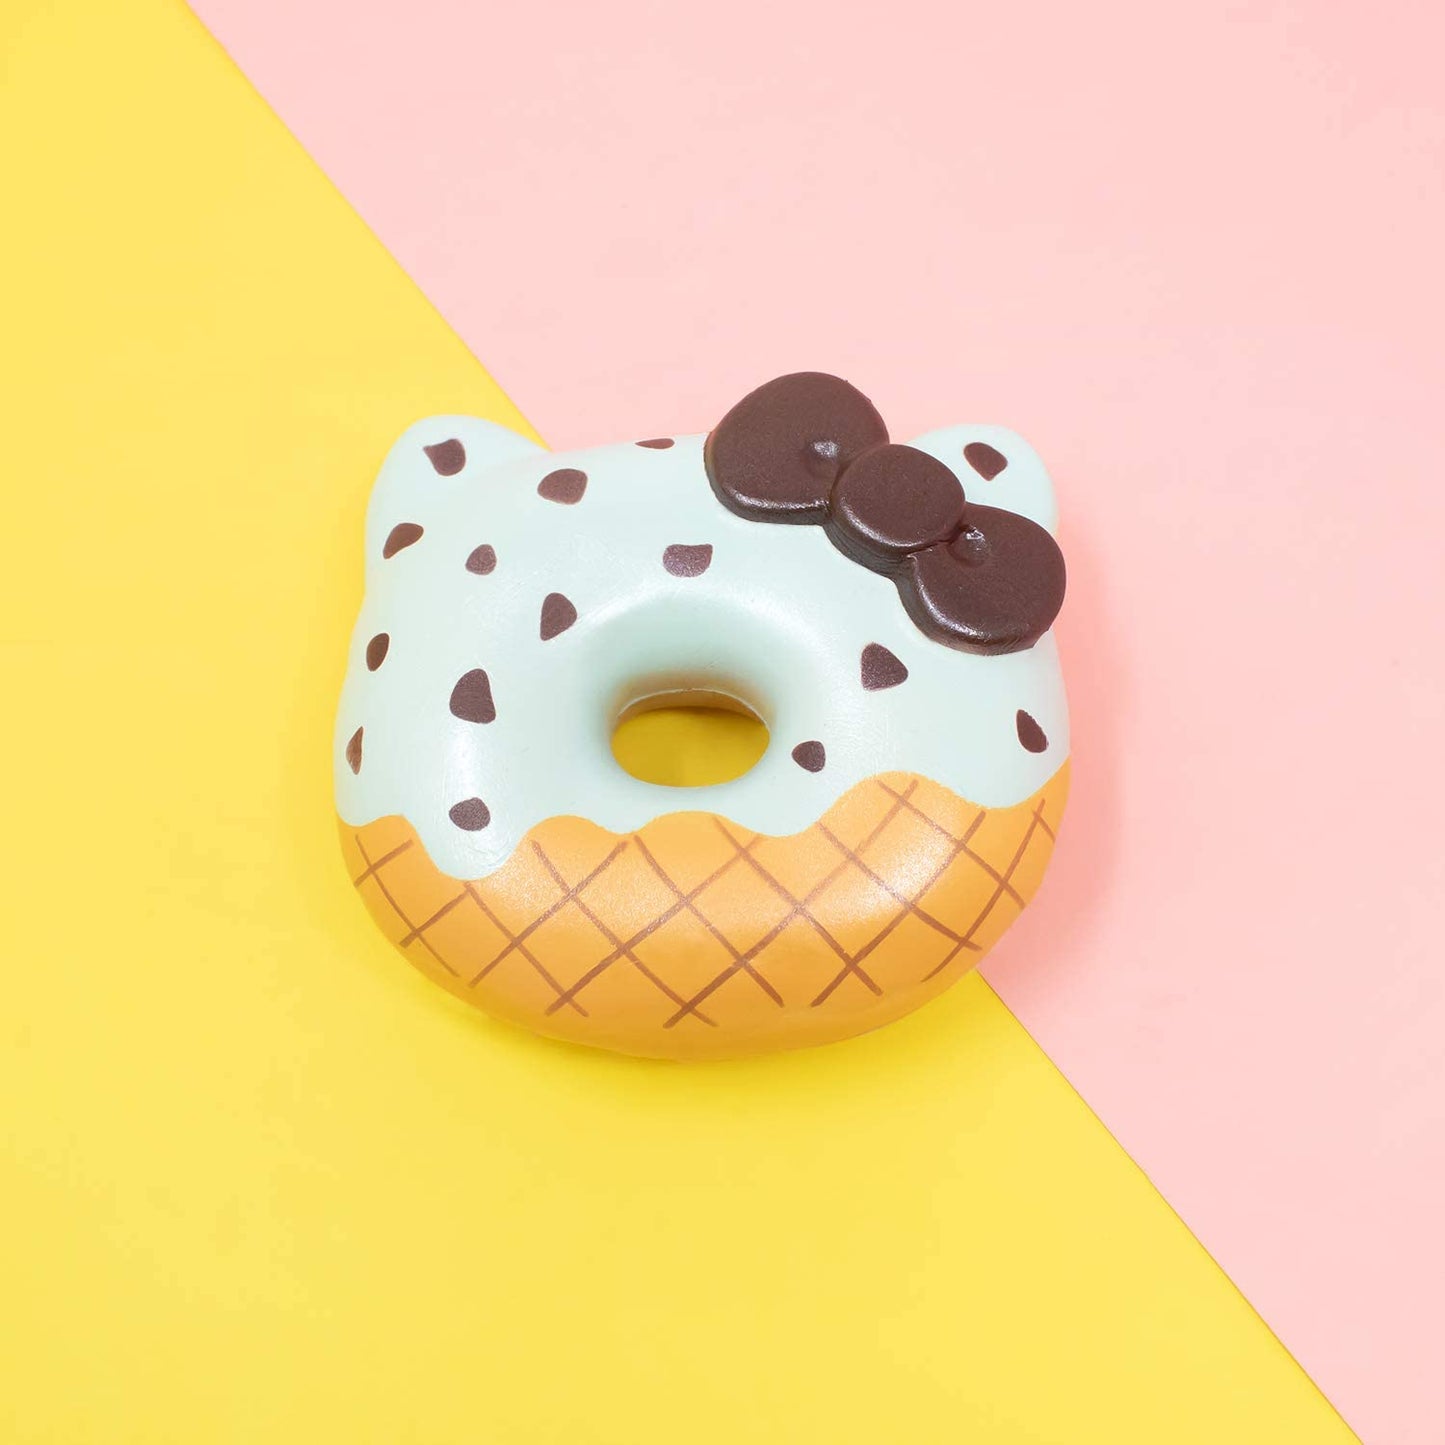 Sanrio Hello Kitty Ice Cream Donut Slow Rising Squishy Toy Keychain (Mint Chocolate) for Party Favors, Stress Balls, Birthday Gift Boxes, Kawaii Squishies for Kids, Girls, Boys, Adults